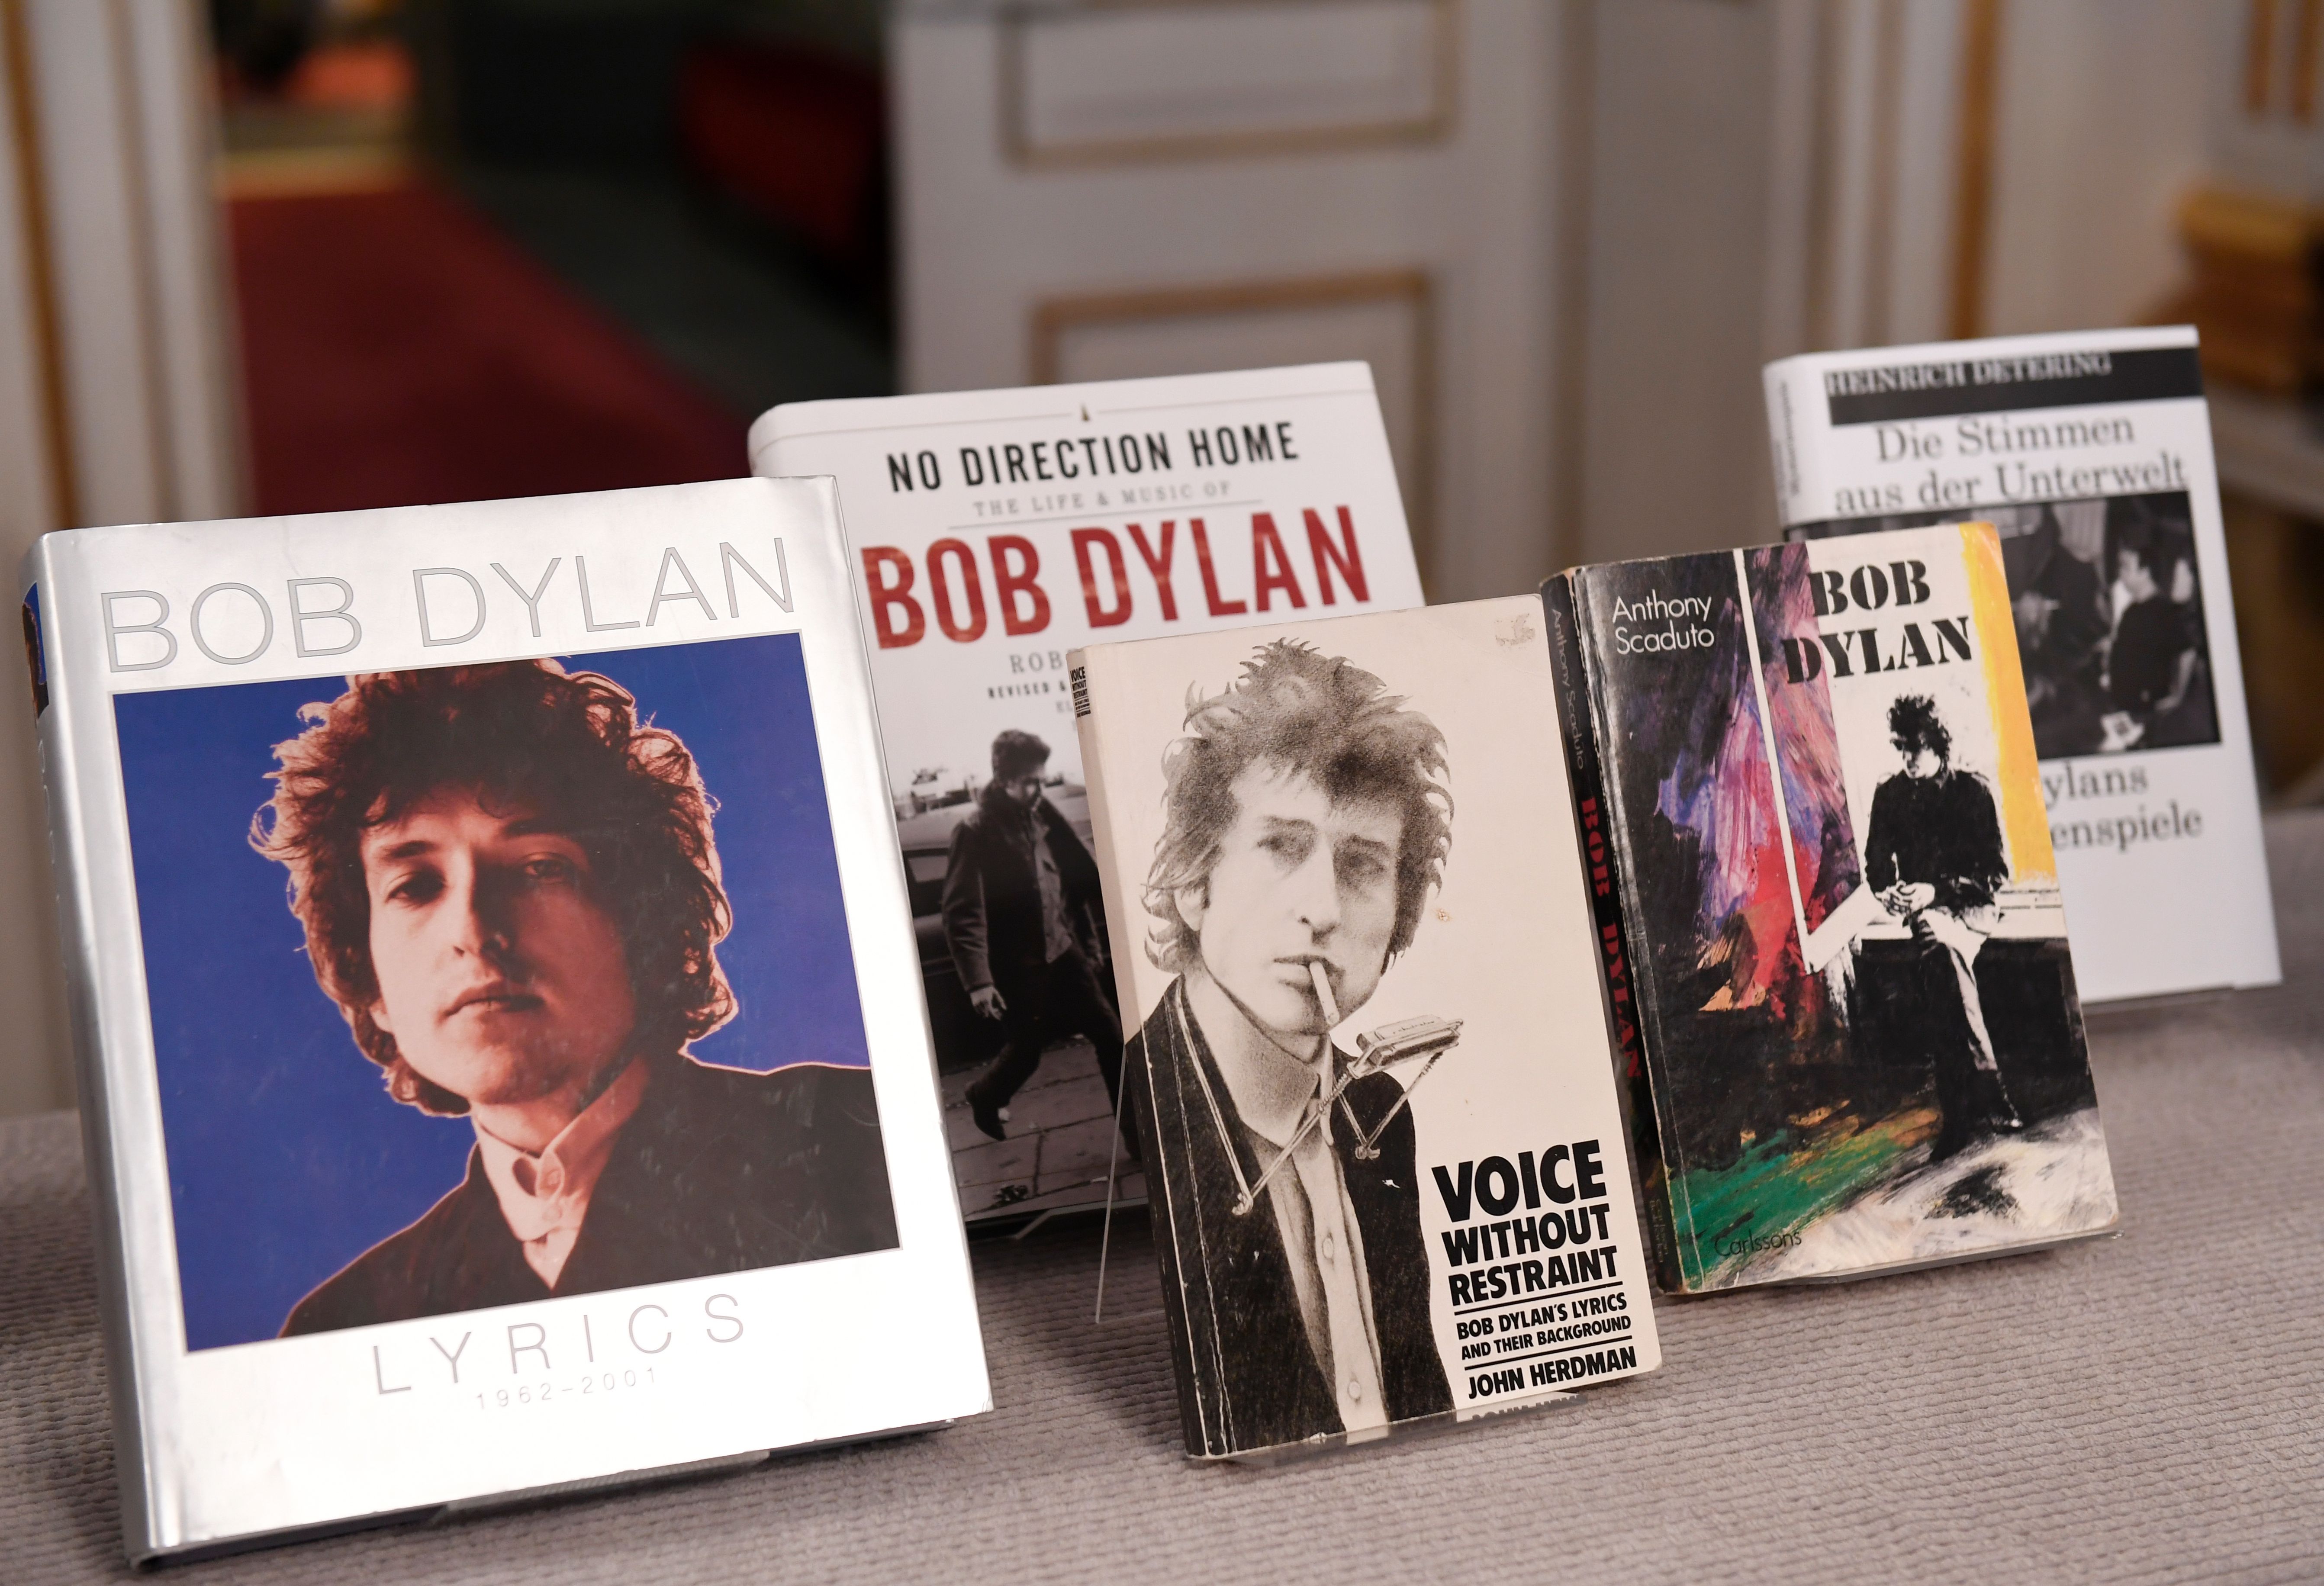 Books by US songwriter Bob Dylan who was announced the laureate of the 2016 Nobel Prize in Literature are displayed at the Swedish Academy in Stockholm, Sweden, on October 13, 2016. US songwriter Bob Dylan wins the 2016 Nobel Literature Prize.